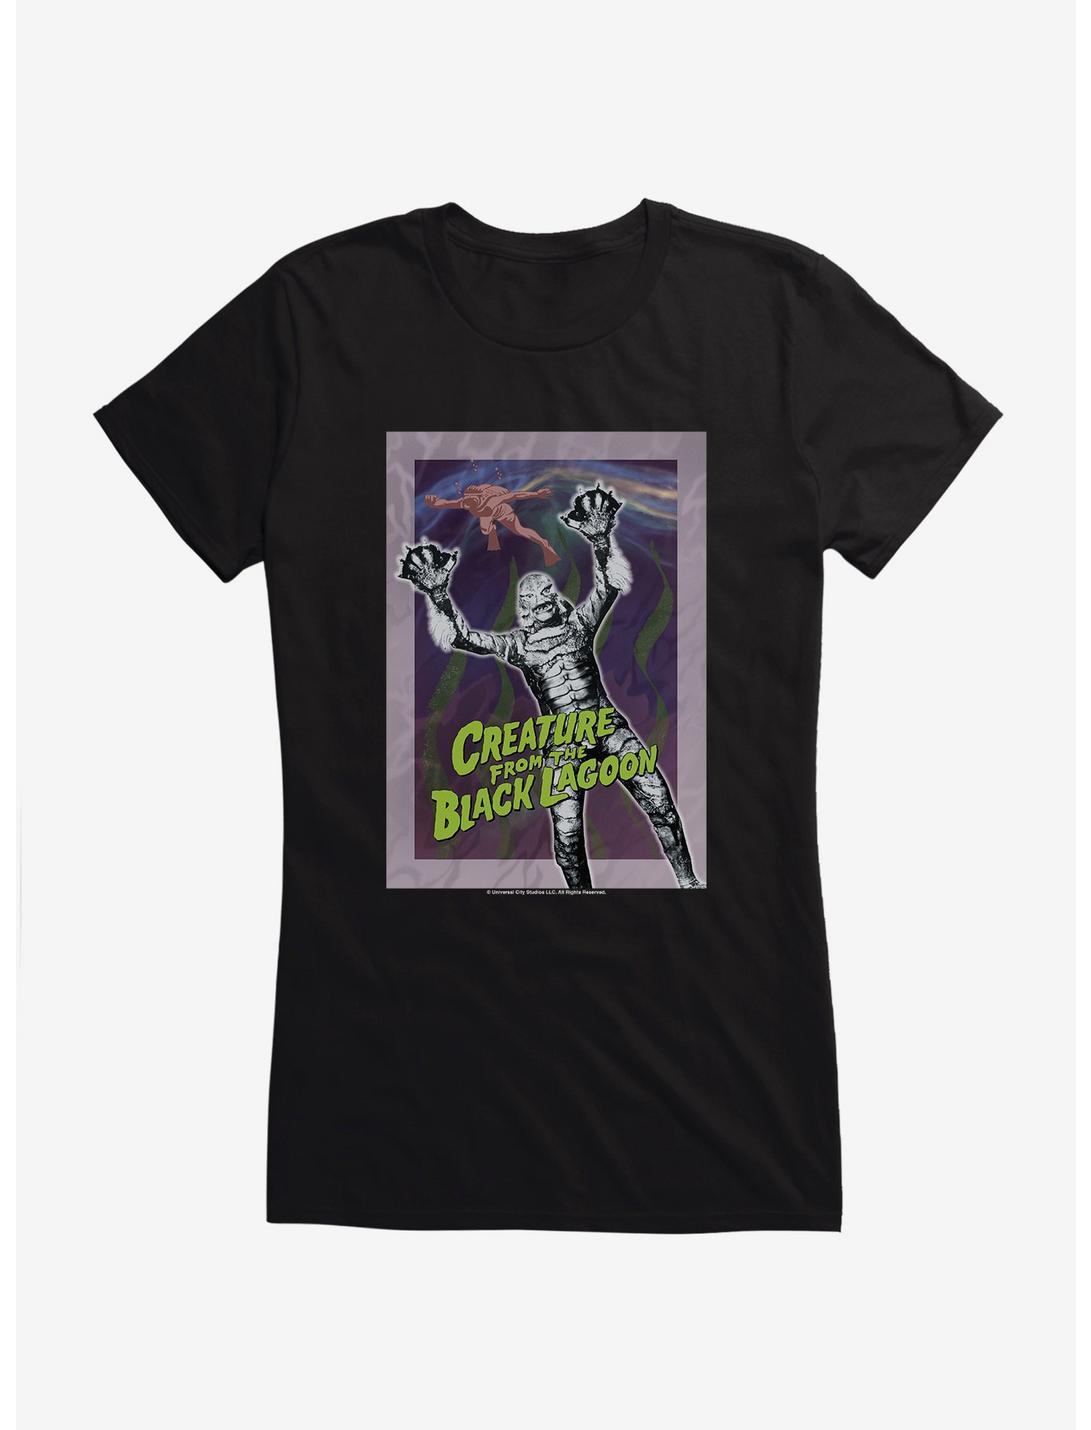 Creature From The Black Lagoon Poster Girls T-Shirt, BLACK, hi-res